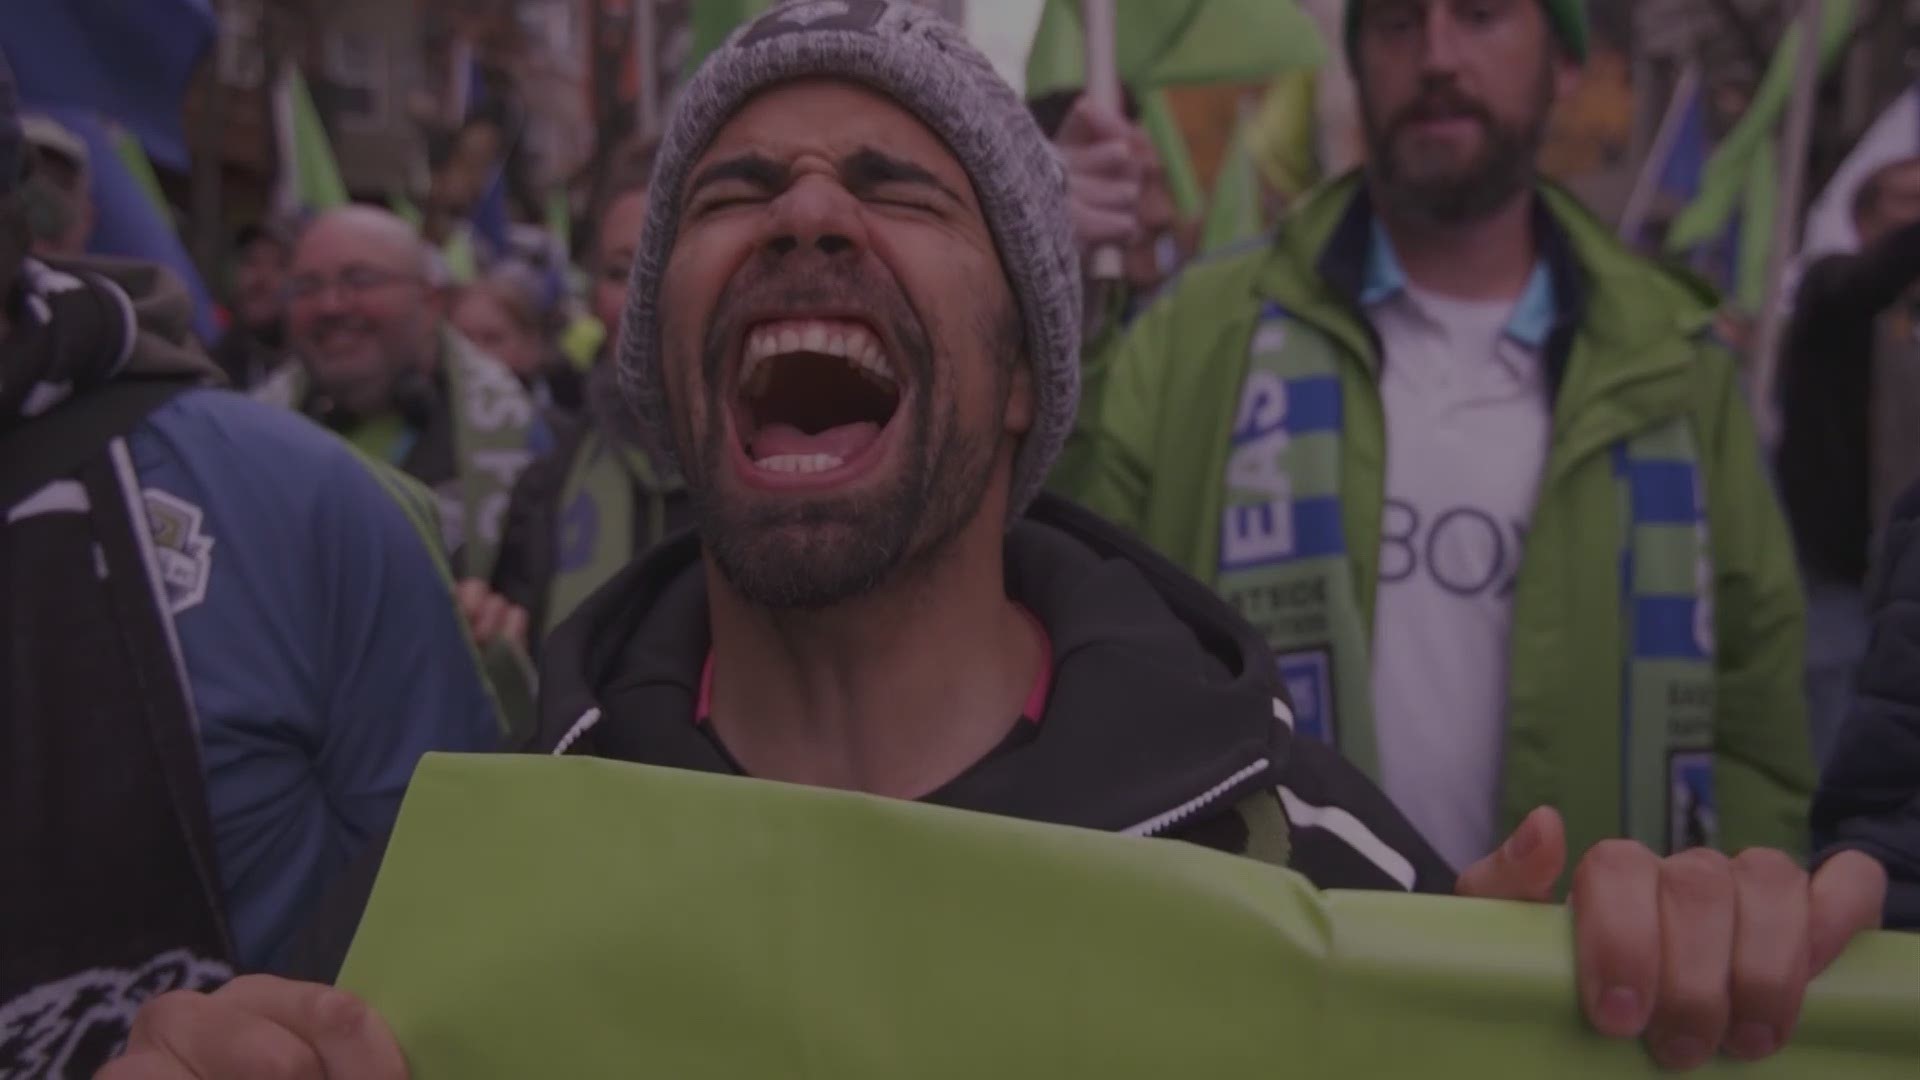 KING 5's Michael Crowe and Joseph Huerta capture Seattle's mood after the Sounders' 2nd MLS Cup victory. king5.com